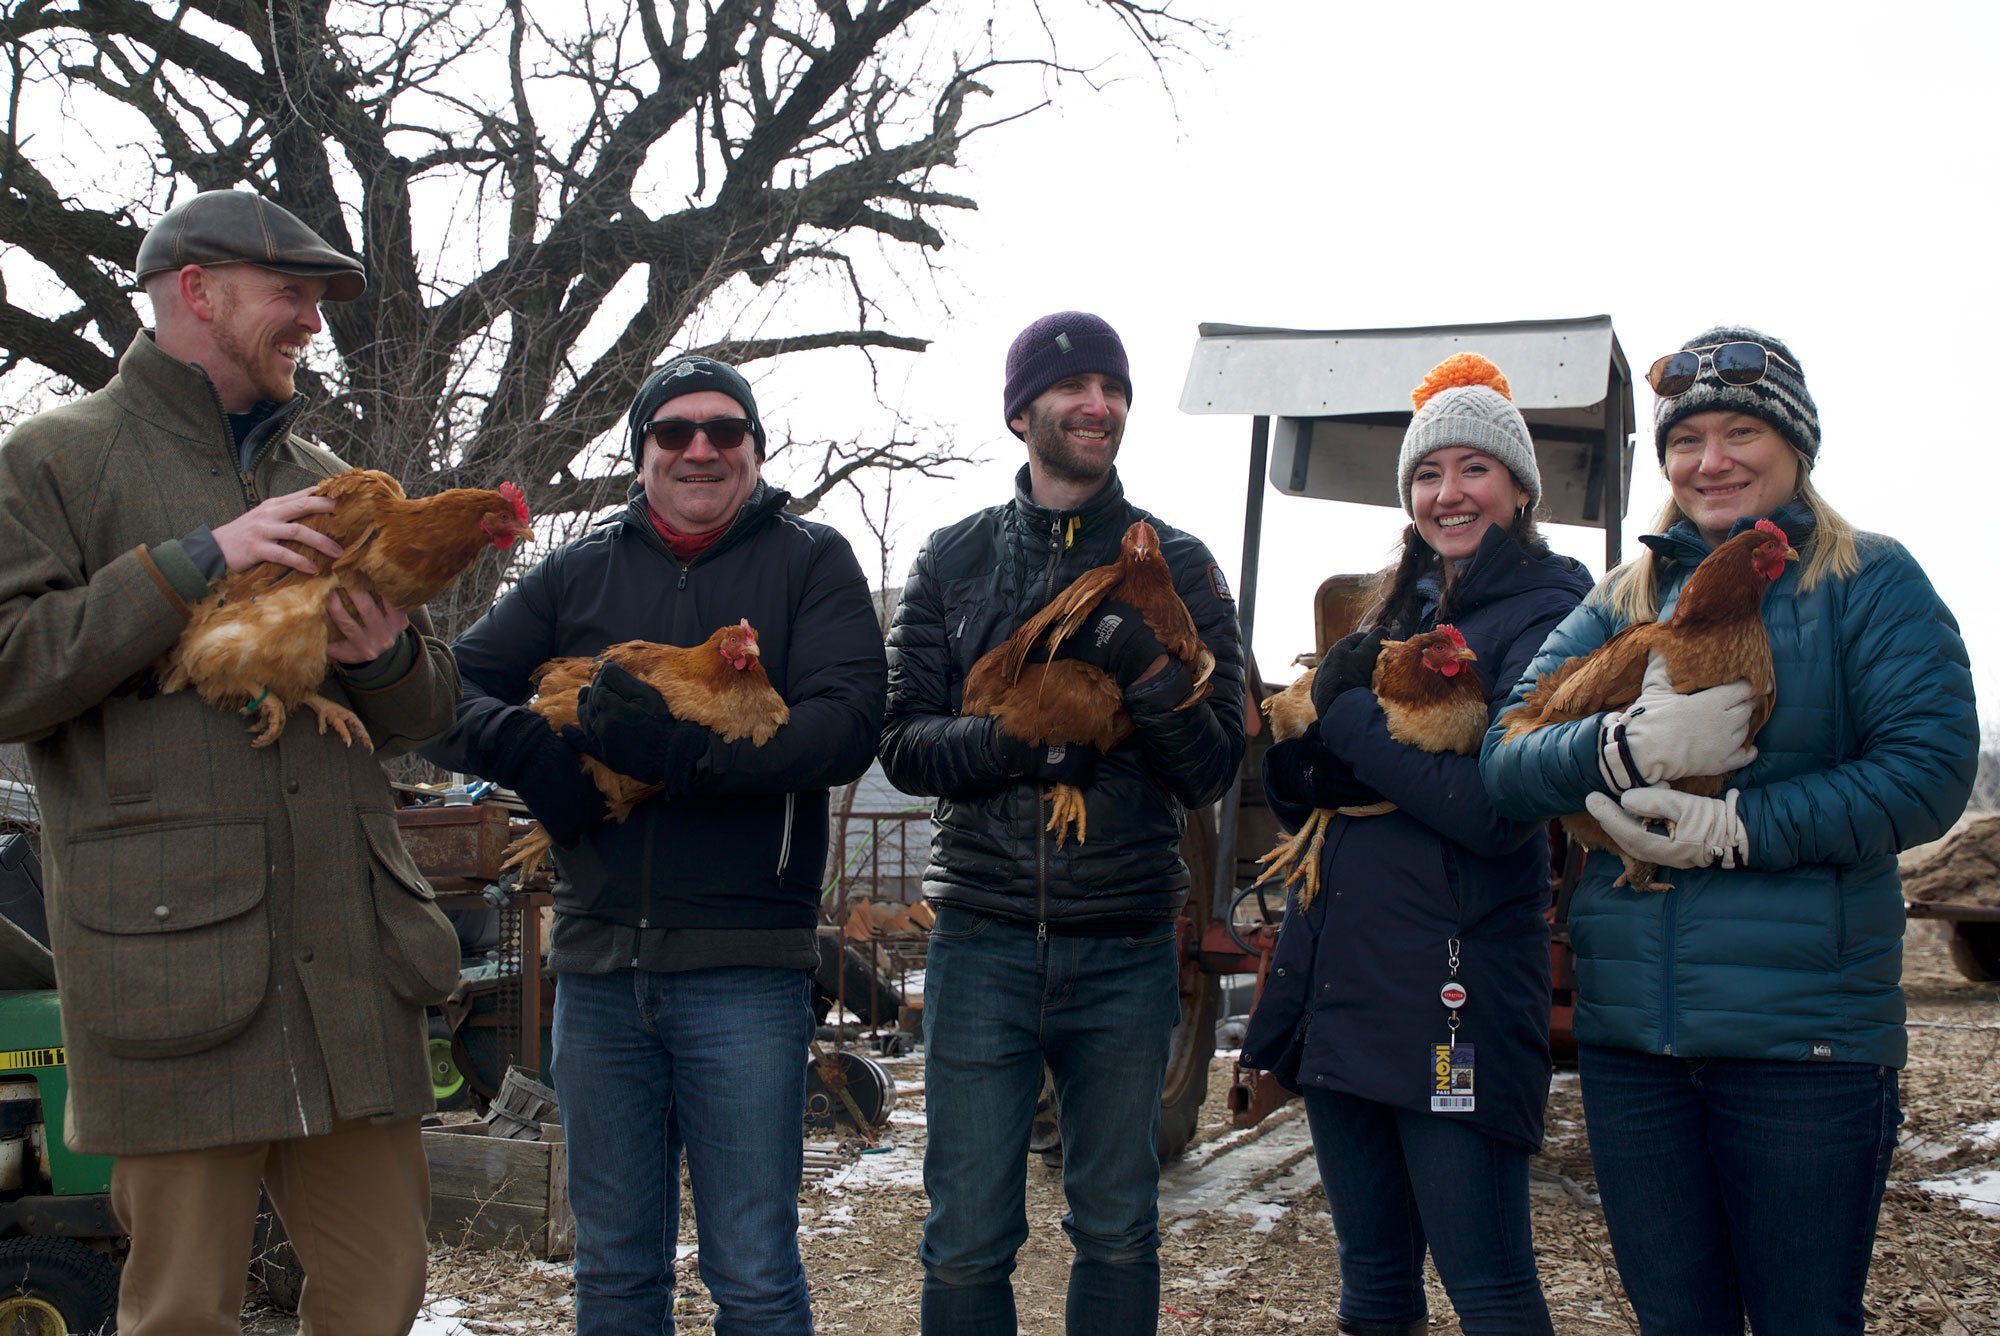 Bond Pets team with chickens